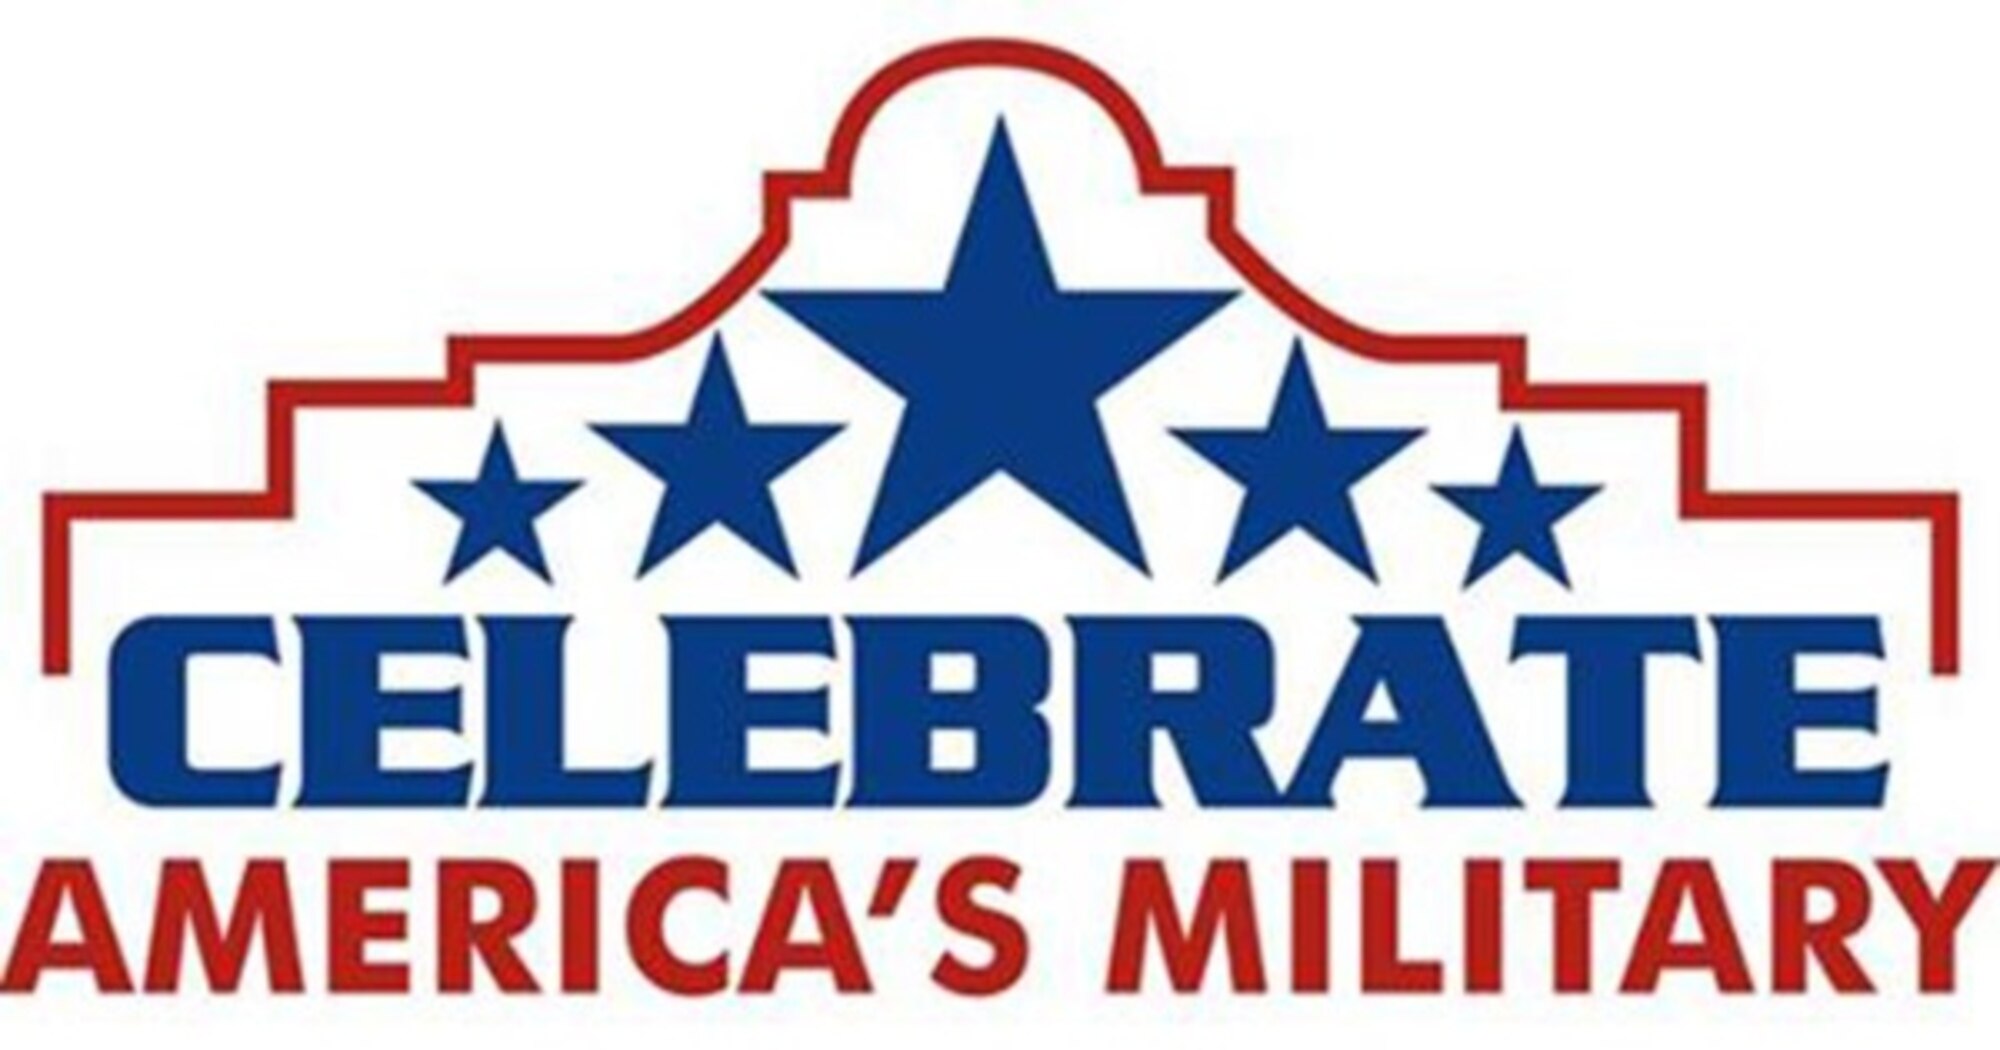 Hosted by the San Antonio Chamber of Commerce, Celebrate America's Military is a series of events honoring the men and women who serve in the nation's military: active duty, Guard and Reserve from all branches.